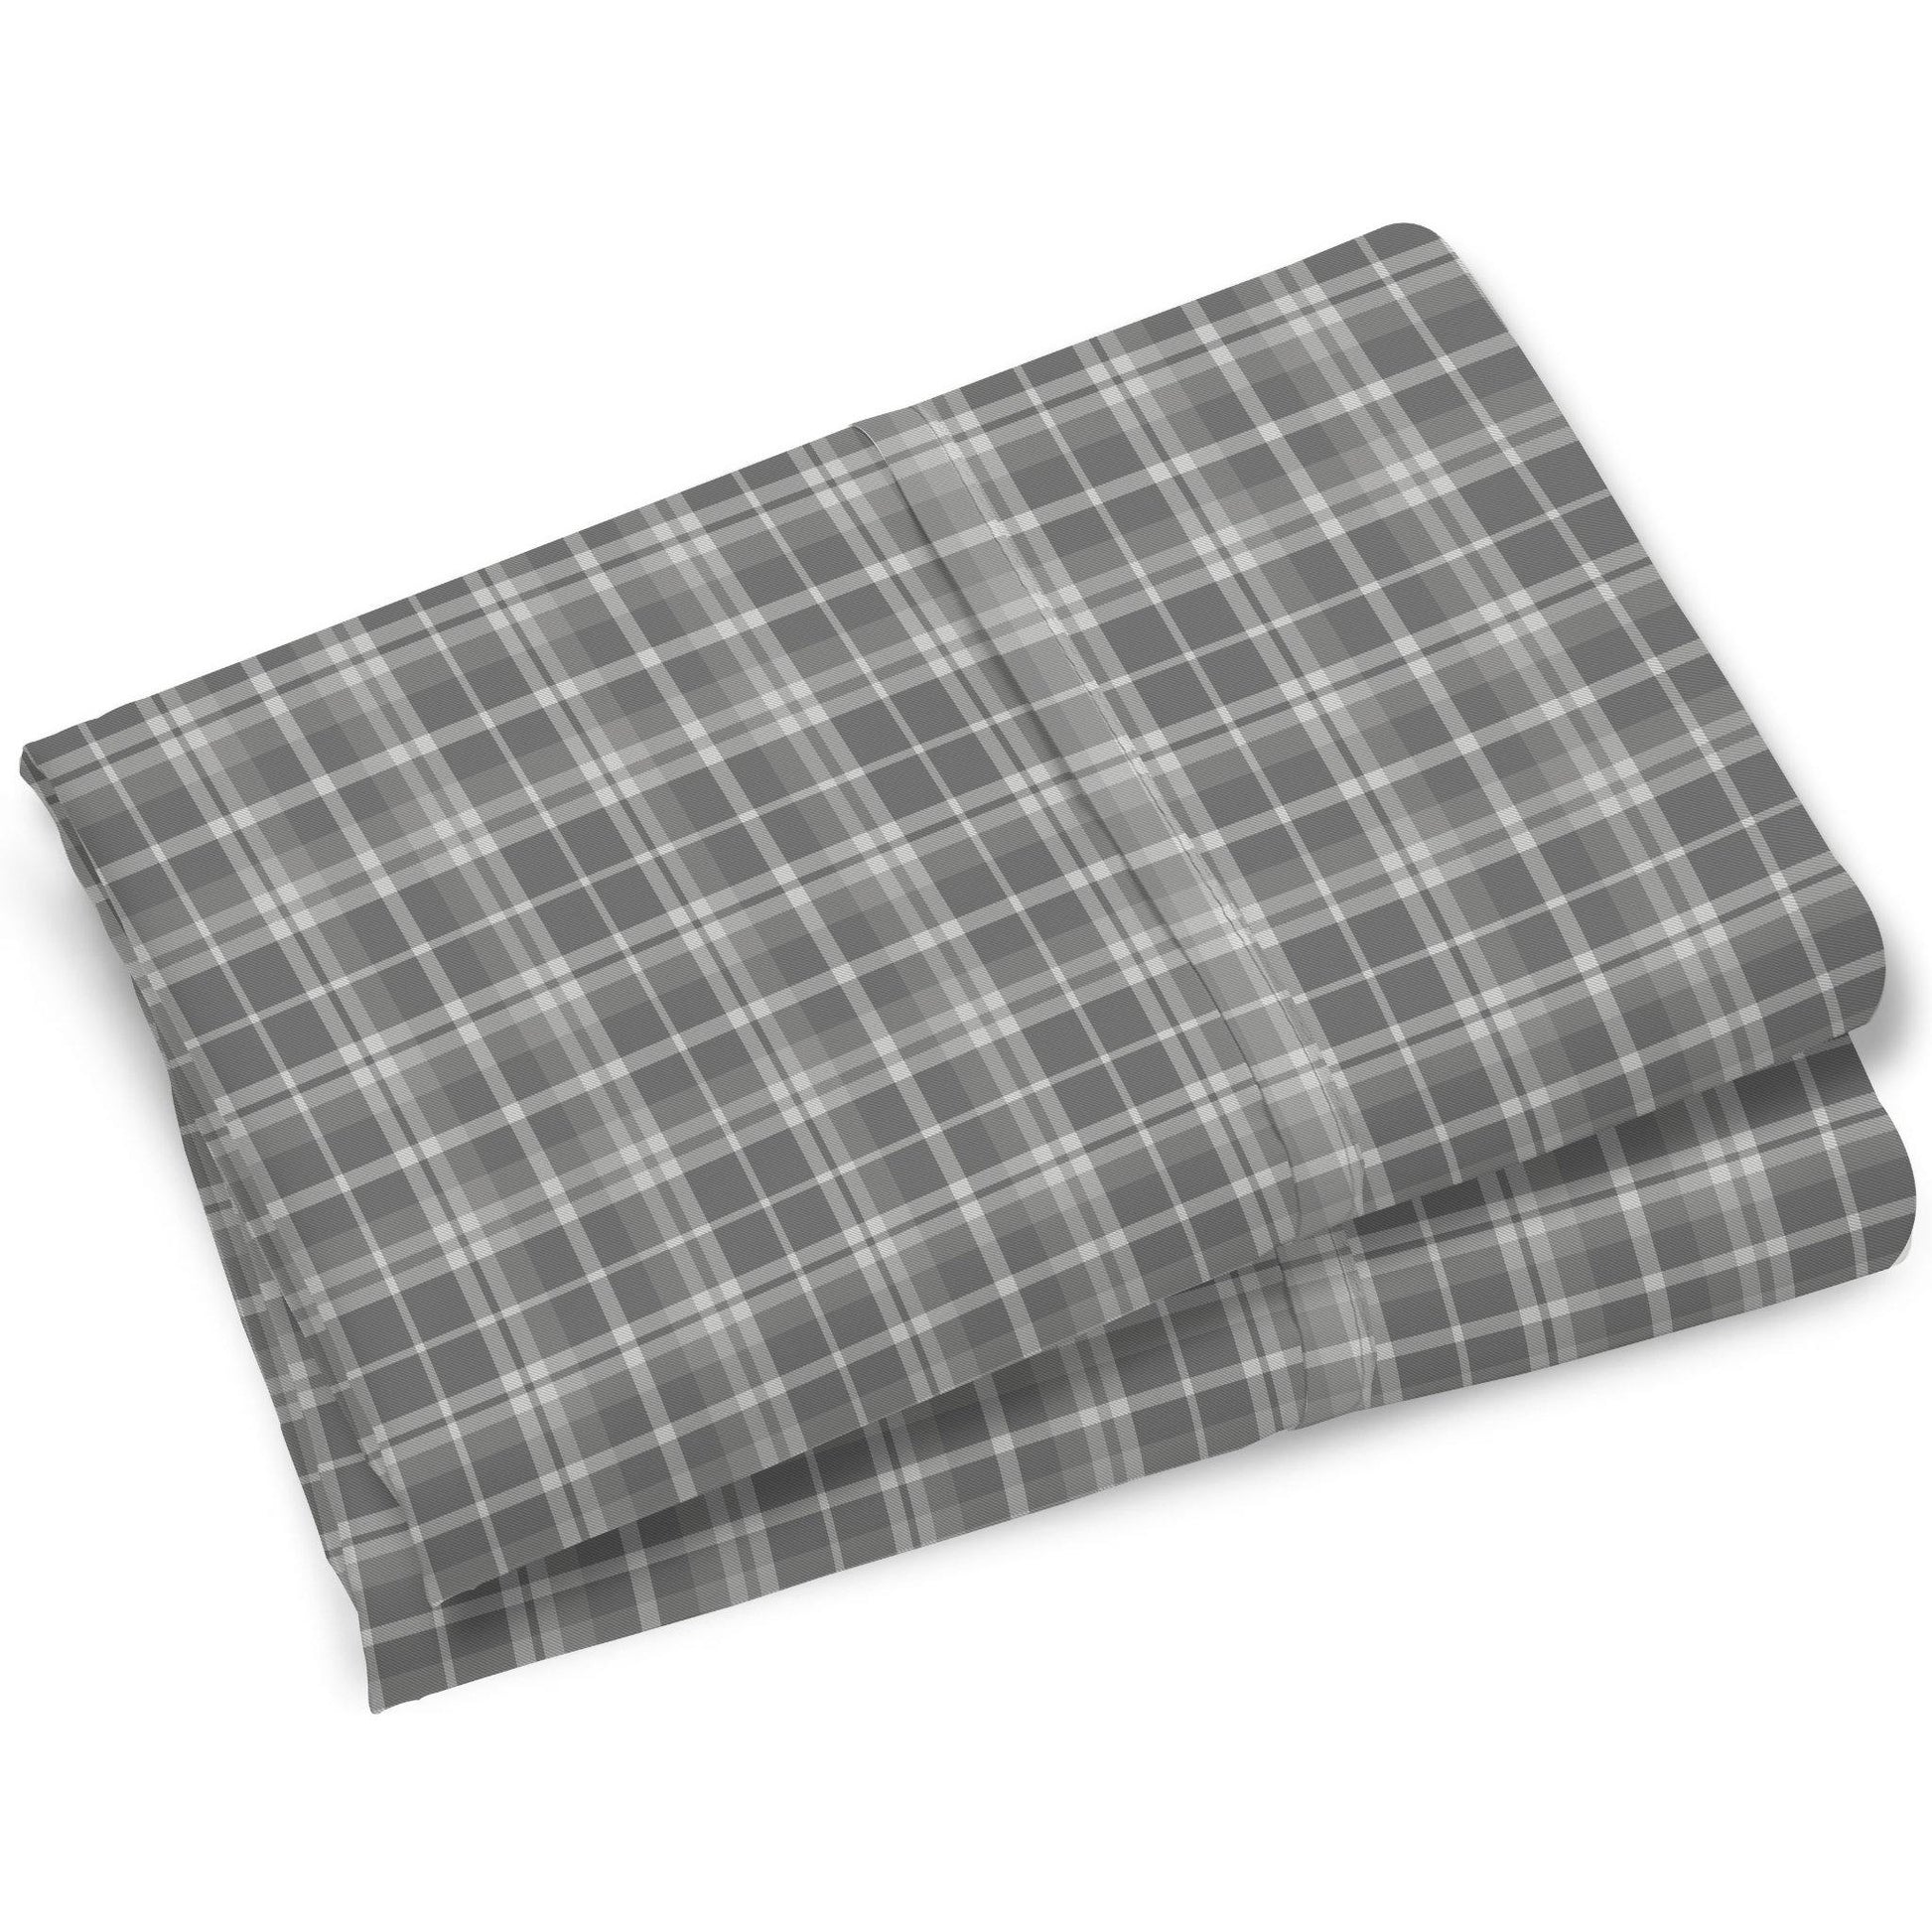 Lavish Touch 100% Cotton Double Brushed Flannel 160 GSM Pack of 2 Pillowcases - Kea Global